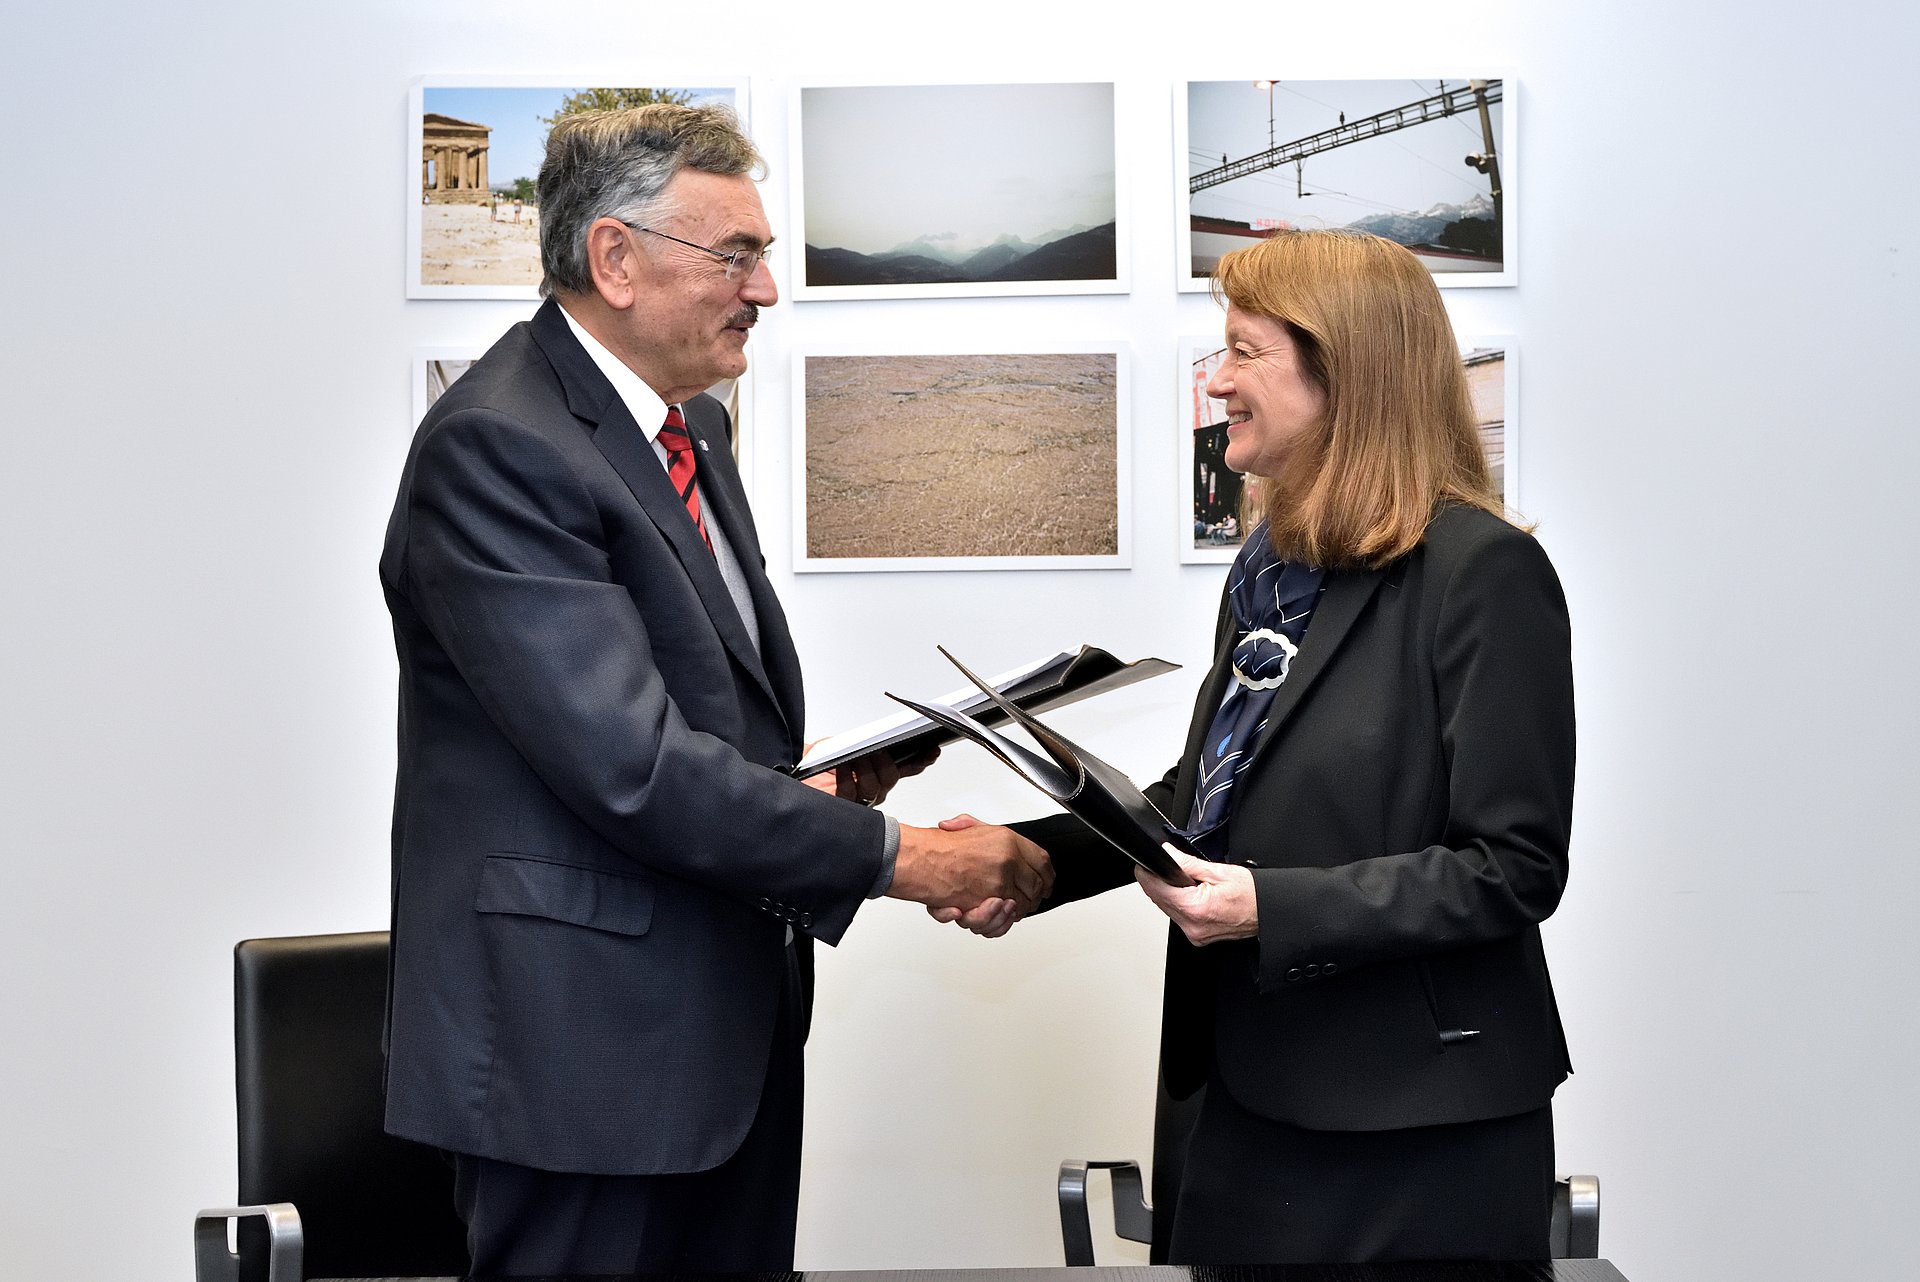 Alice Gast and Wolfgang A. Herrmann at agreeing the partnership between ICL and TUM. (Picture: jo mieszkowski / ICL)